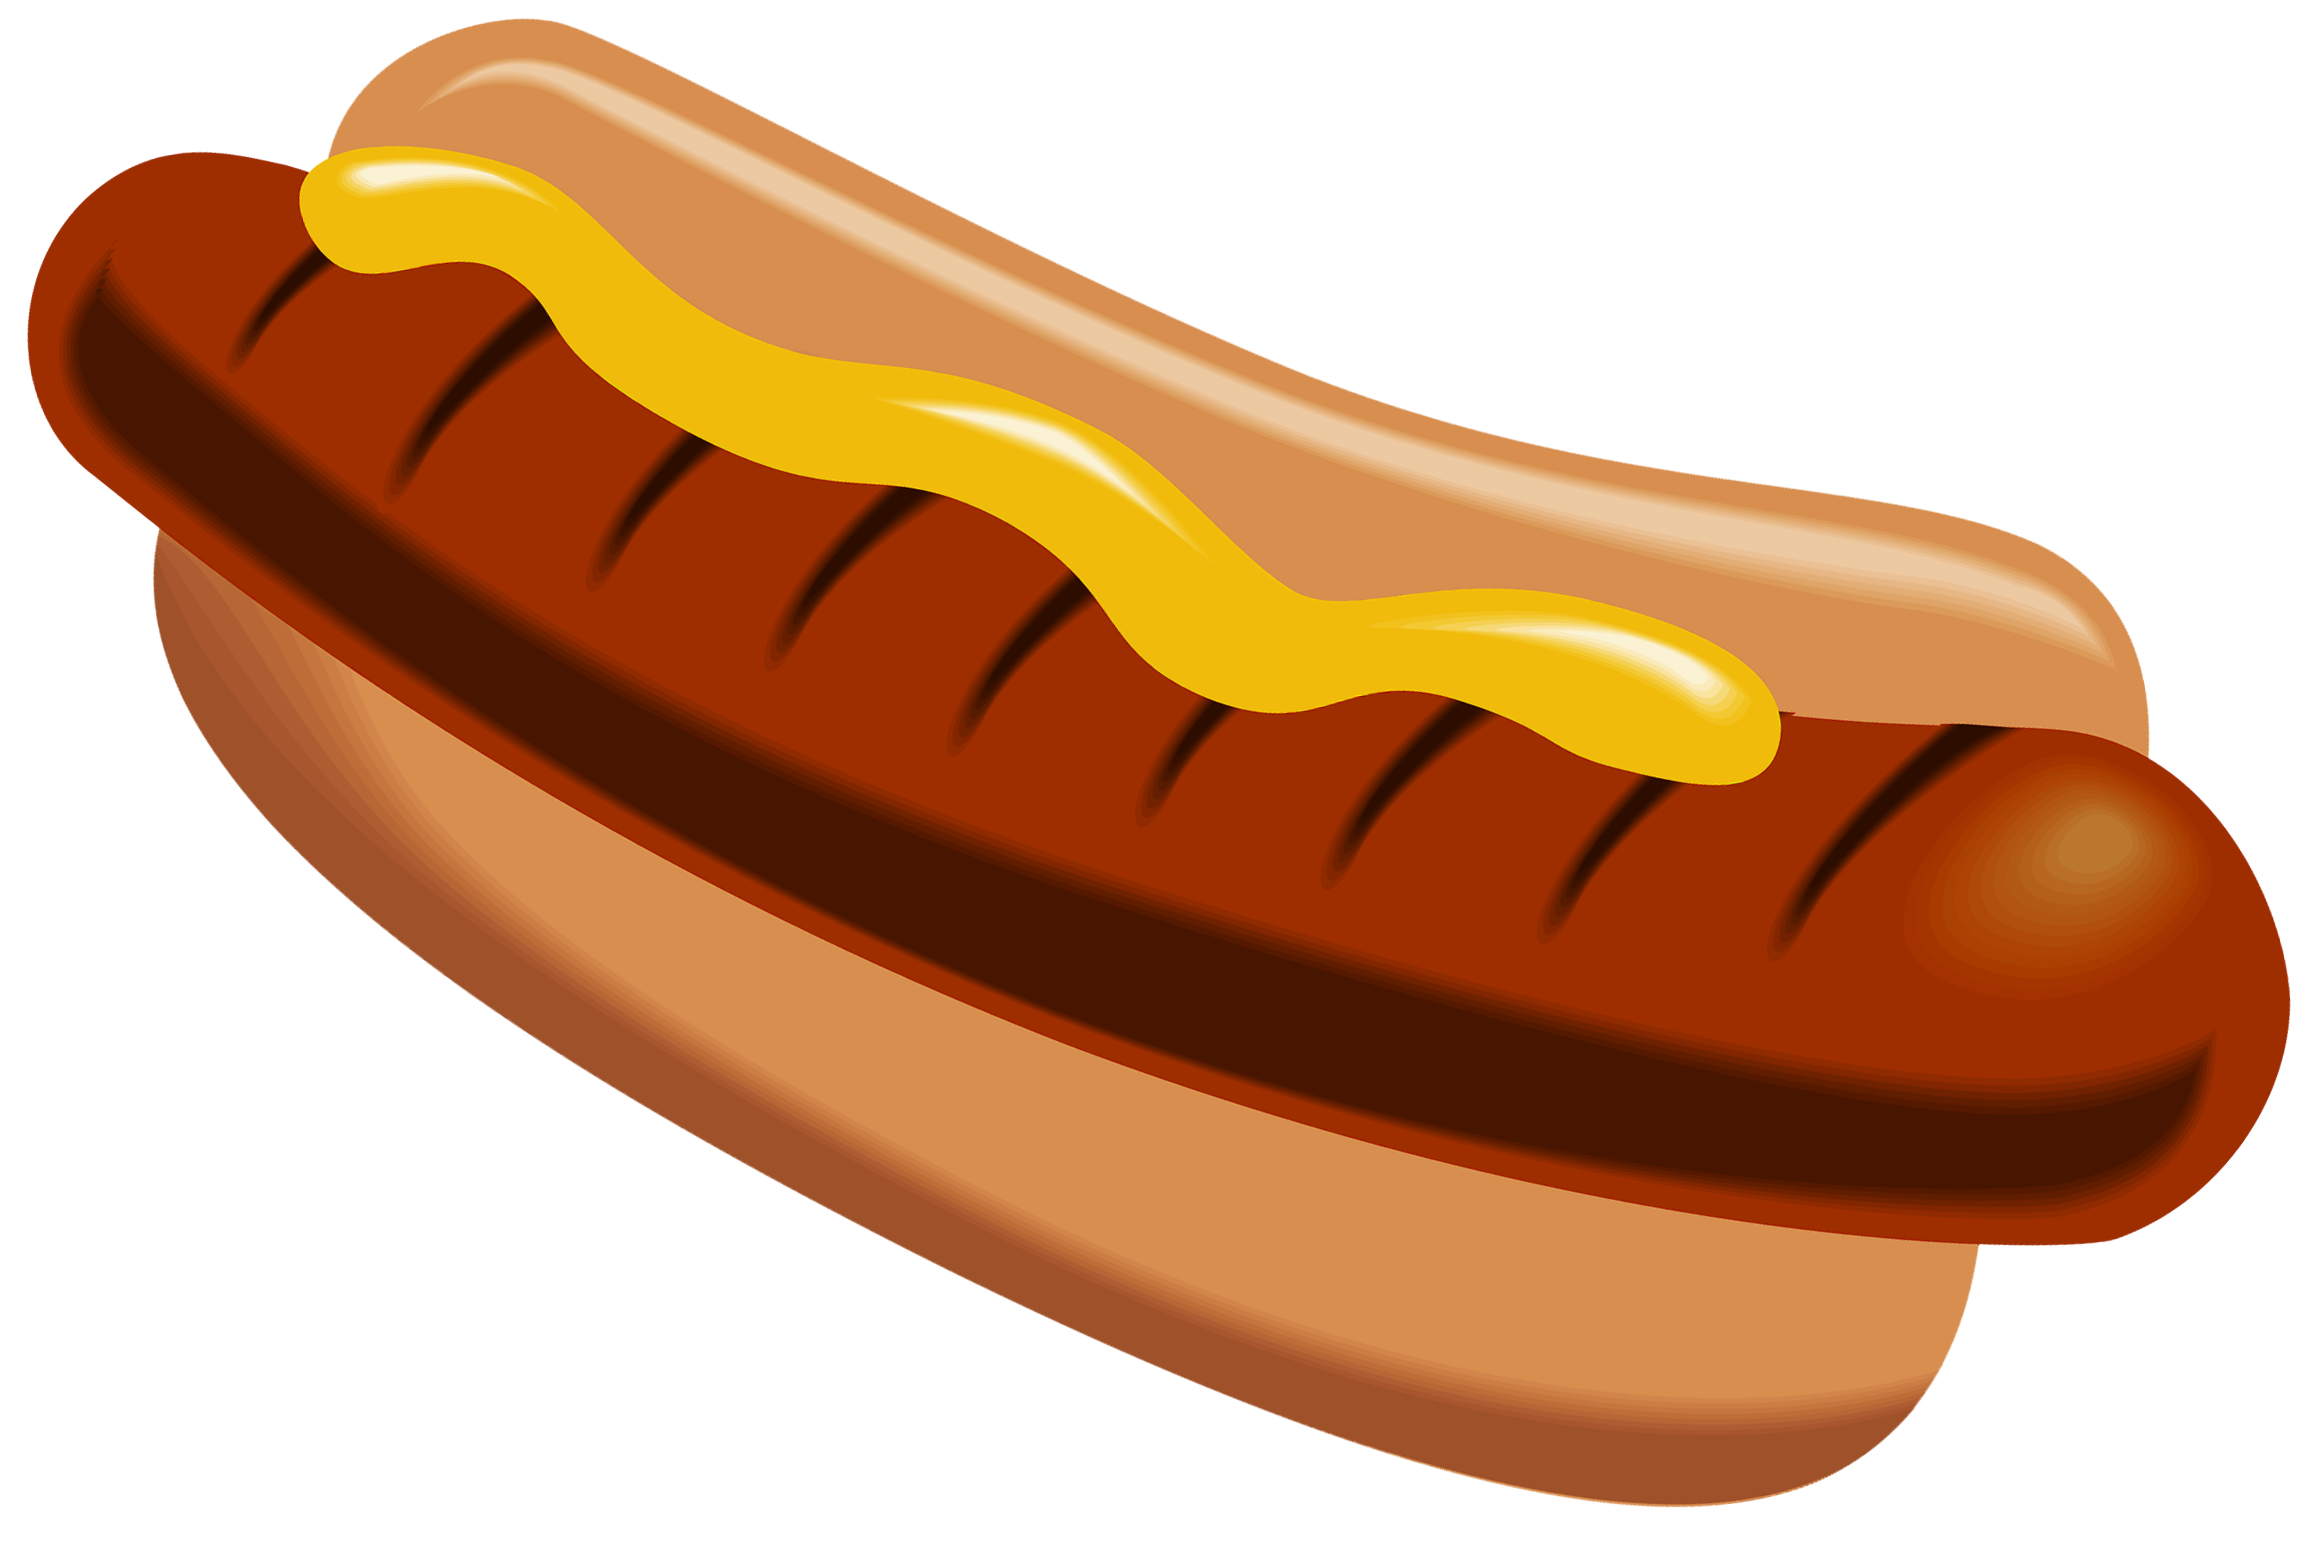 Free Hot Dog Clipart - ClipArt Best